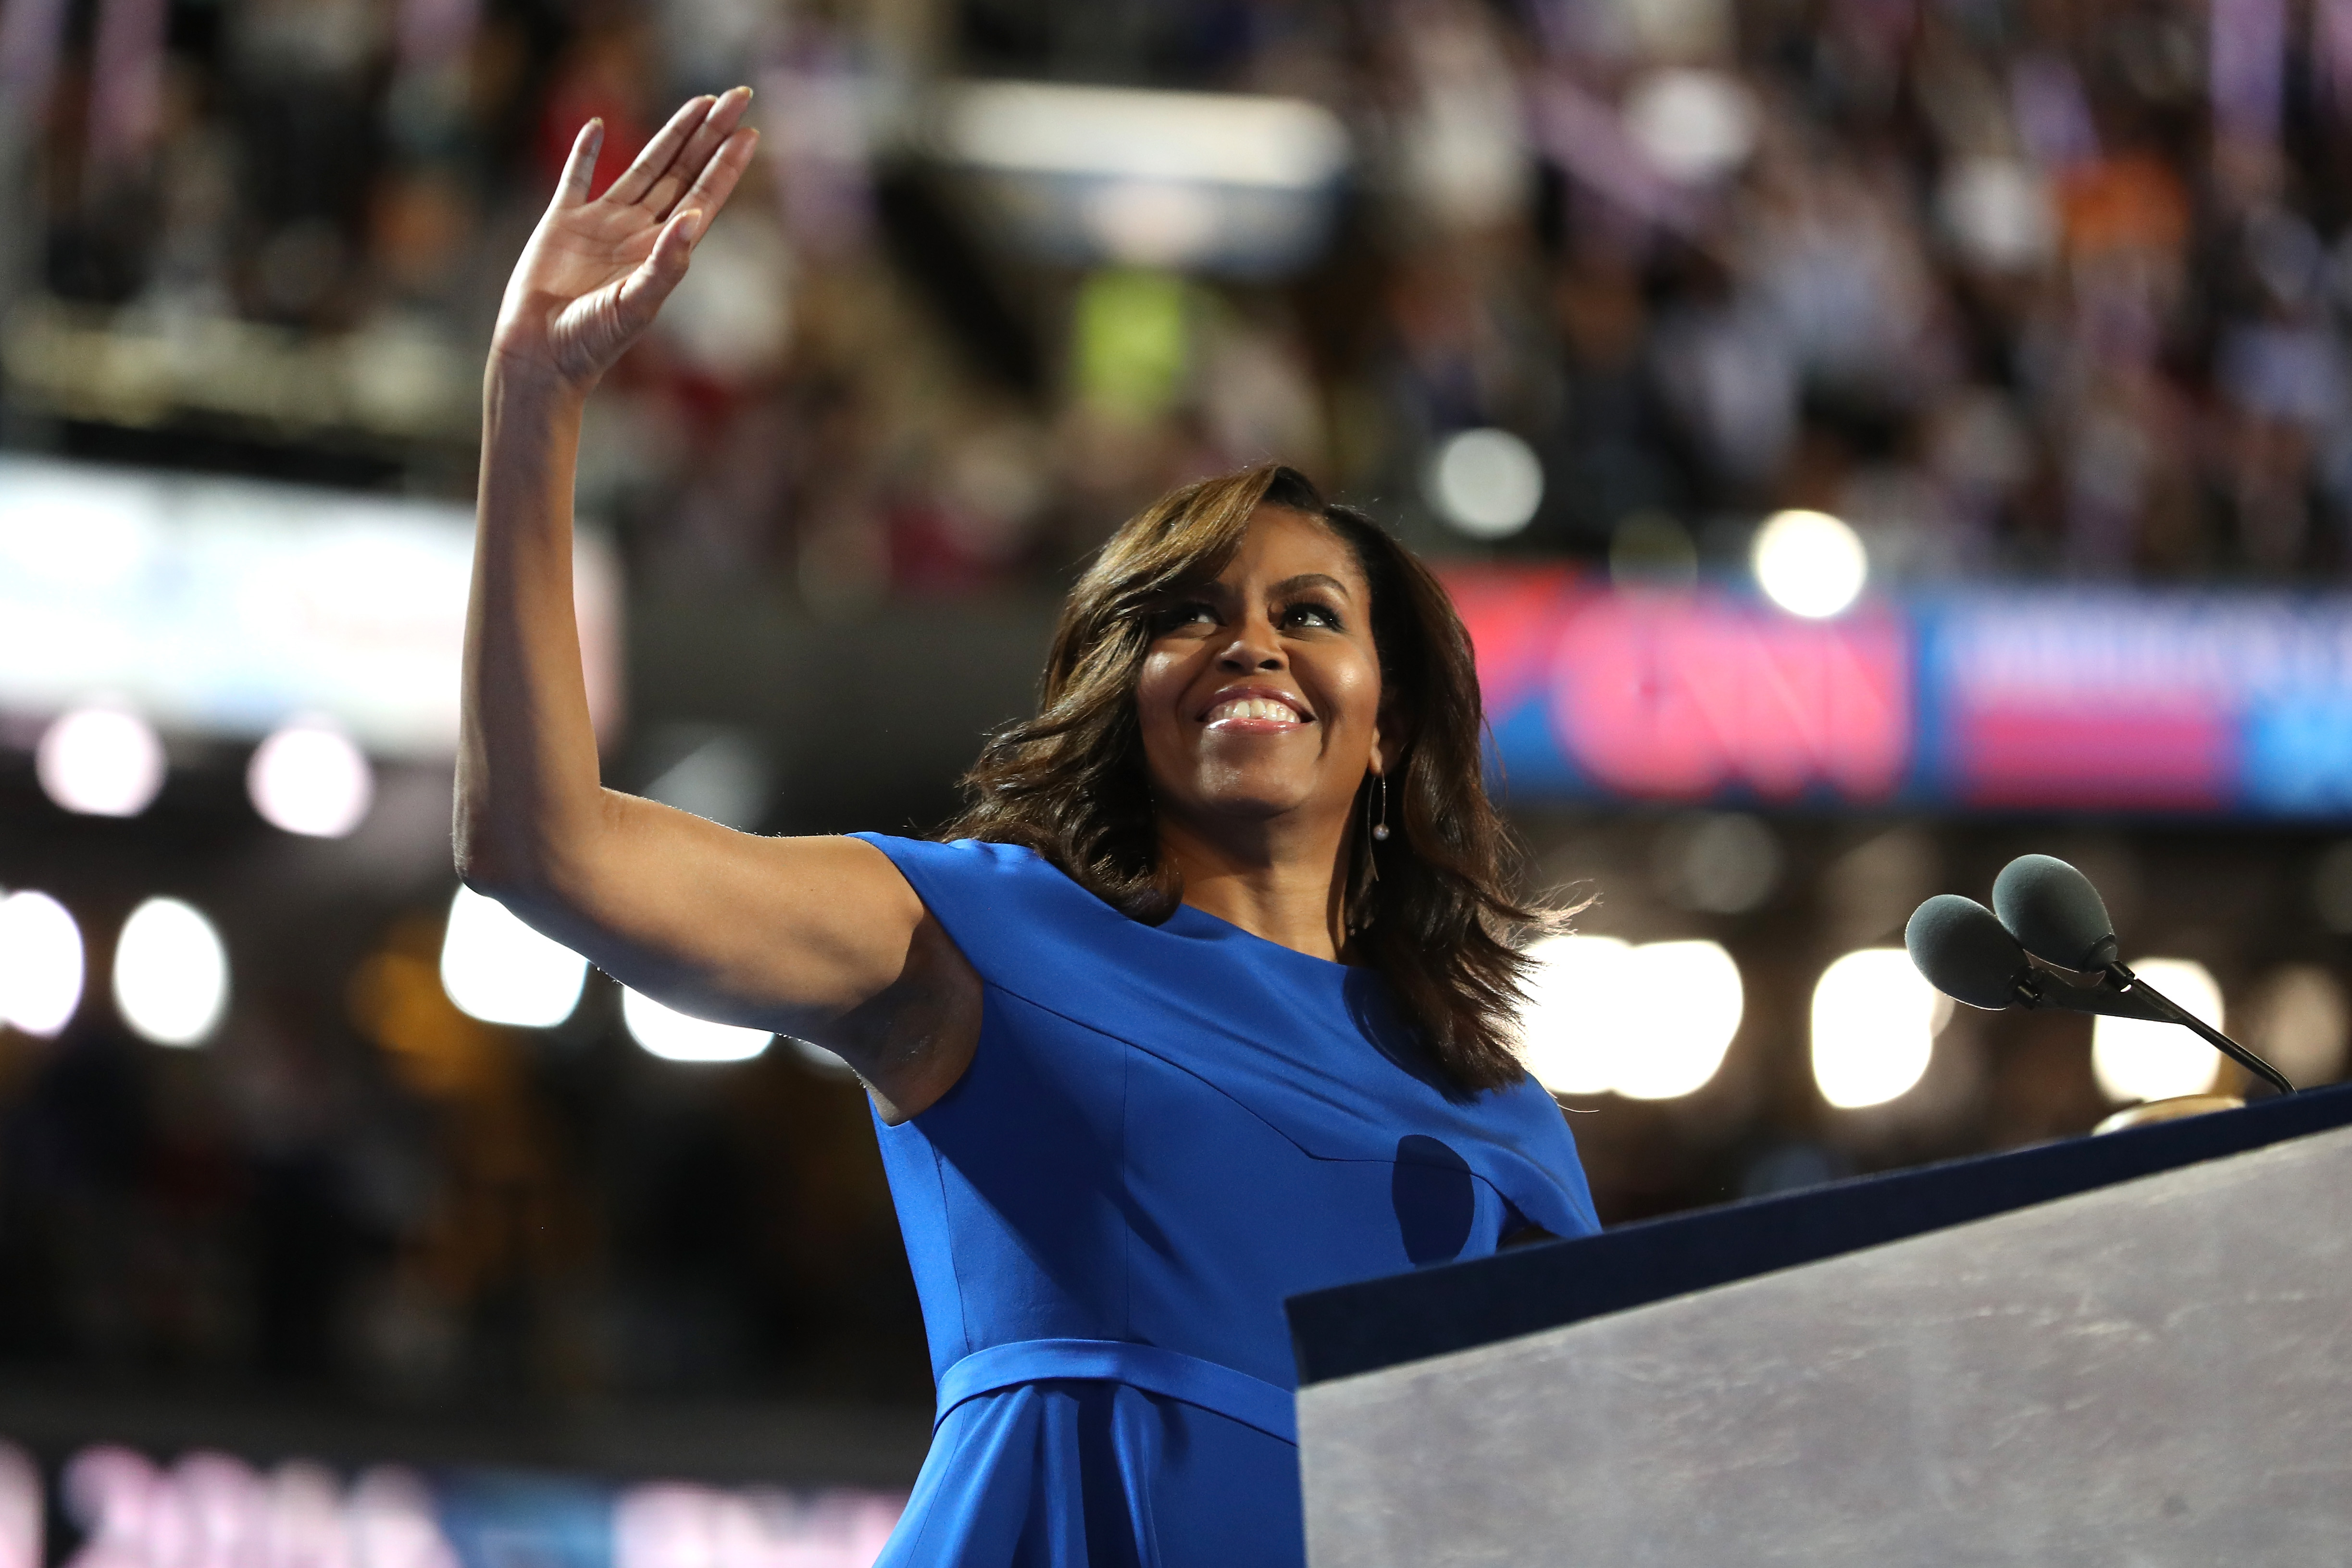 First lady Michelle Obama acknowledges the crowd after delivering remarks on the first day of the Democratic National Convention at the Wells Fargo Center, July 25, 2016 in Philadelphia, Pennsylvania. (Photo by Joe Raedle/Getty Images)